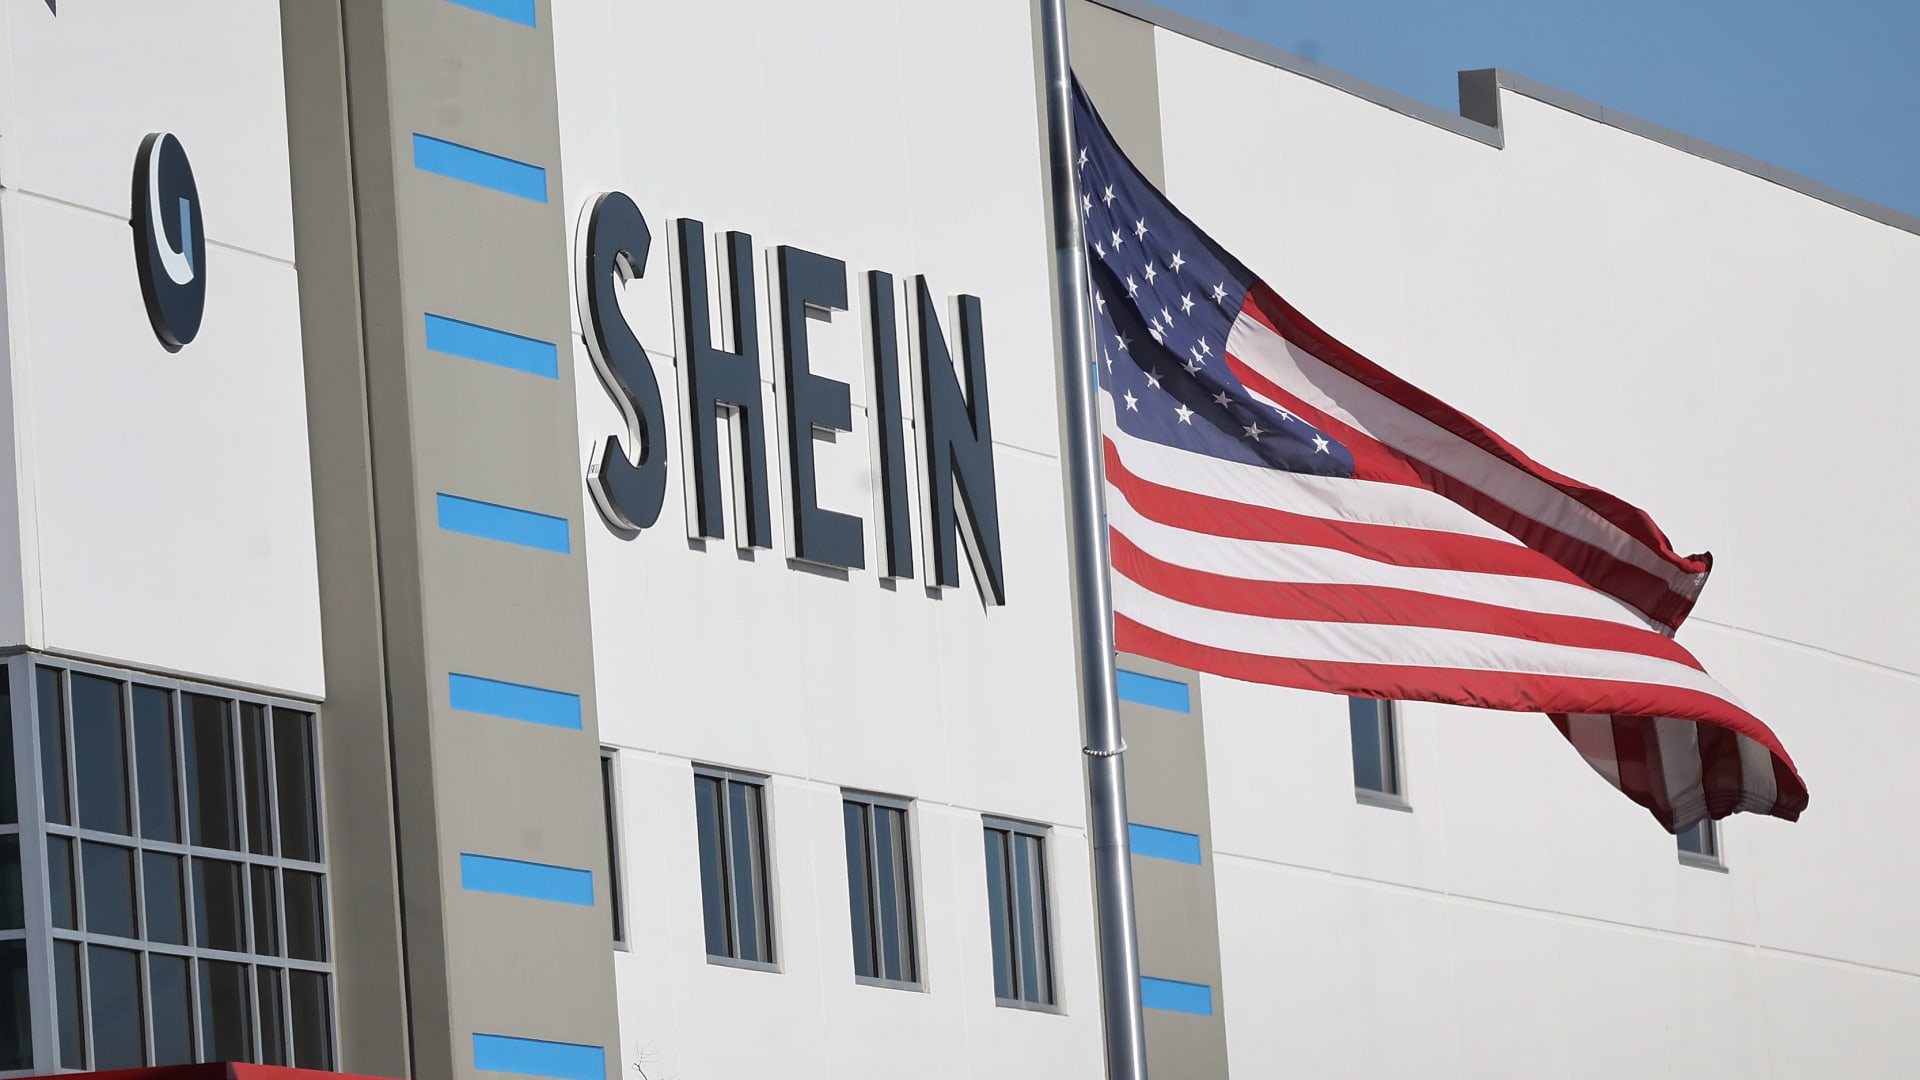 Shein rejects Amazon 'clone' talk ahead of closely watched U.S. listing